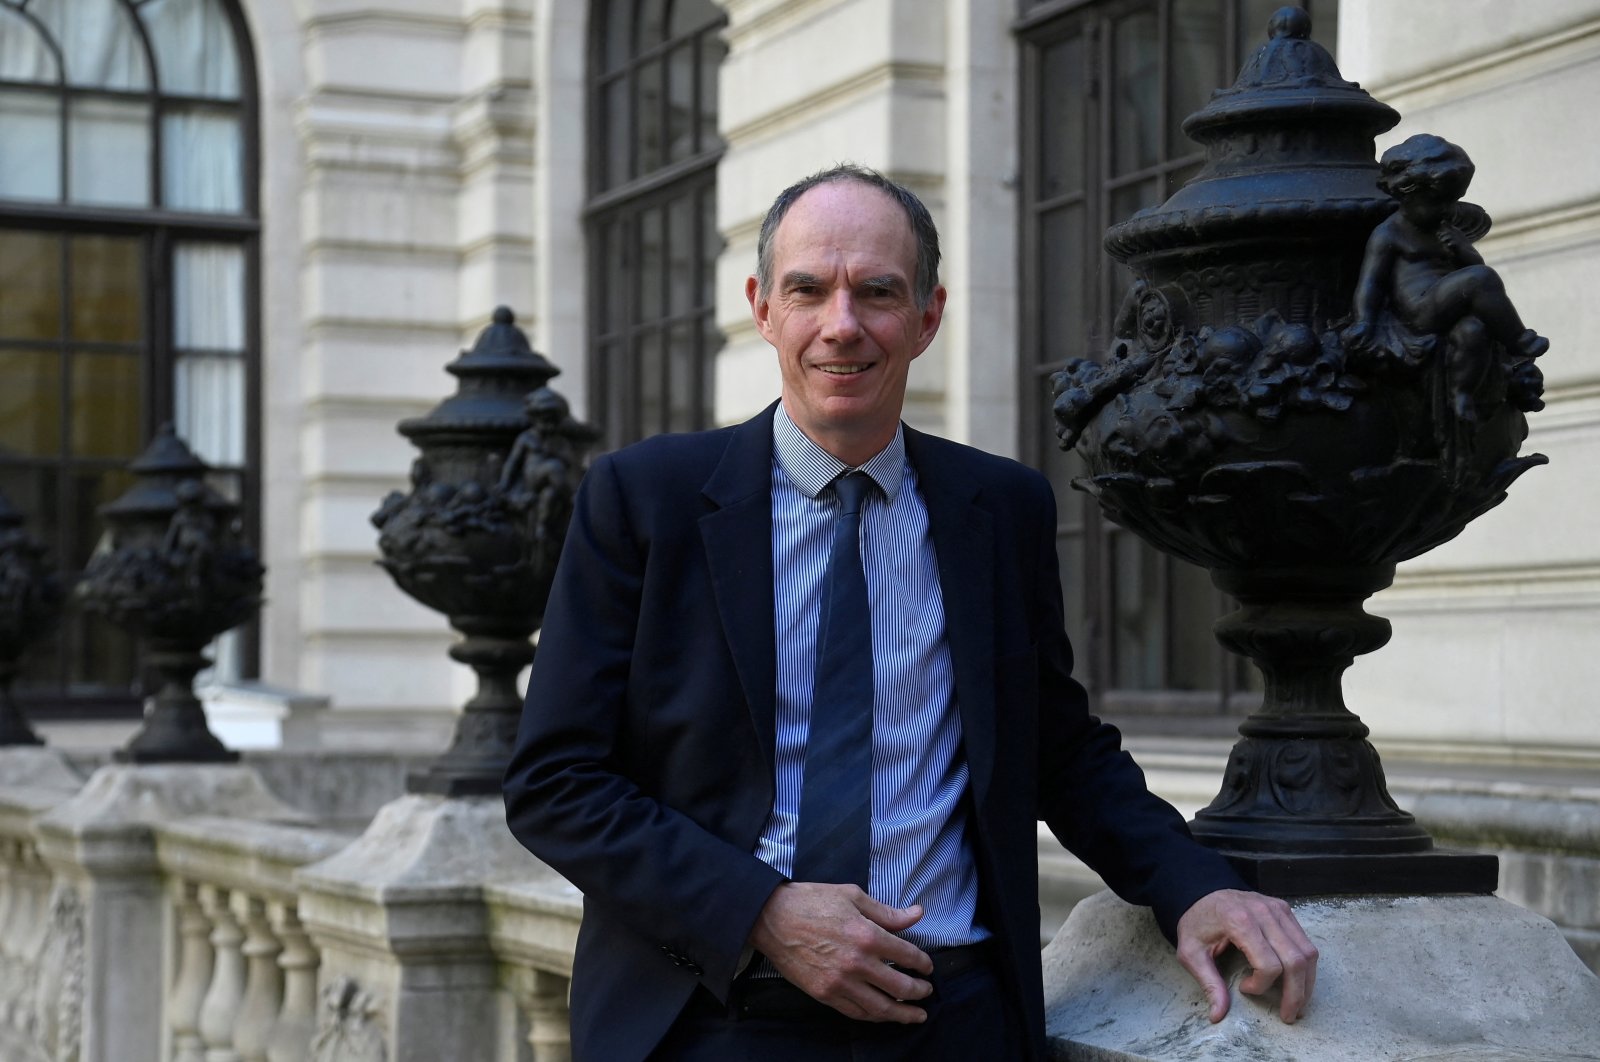 Bank of England Deputy Governor Dave Ramsden stands for a portrait during an interview with Reuters, at the Bank of England, London, Britain, Aug. 8, 2022. (Reuters Photo)